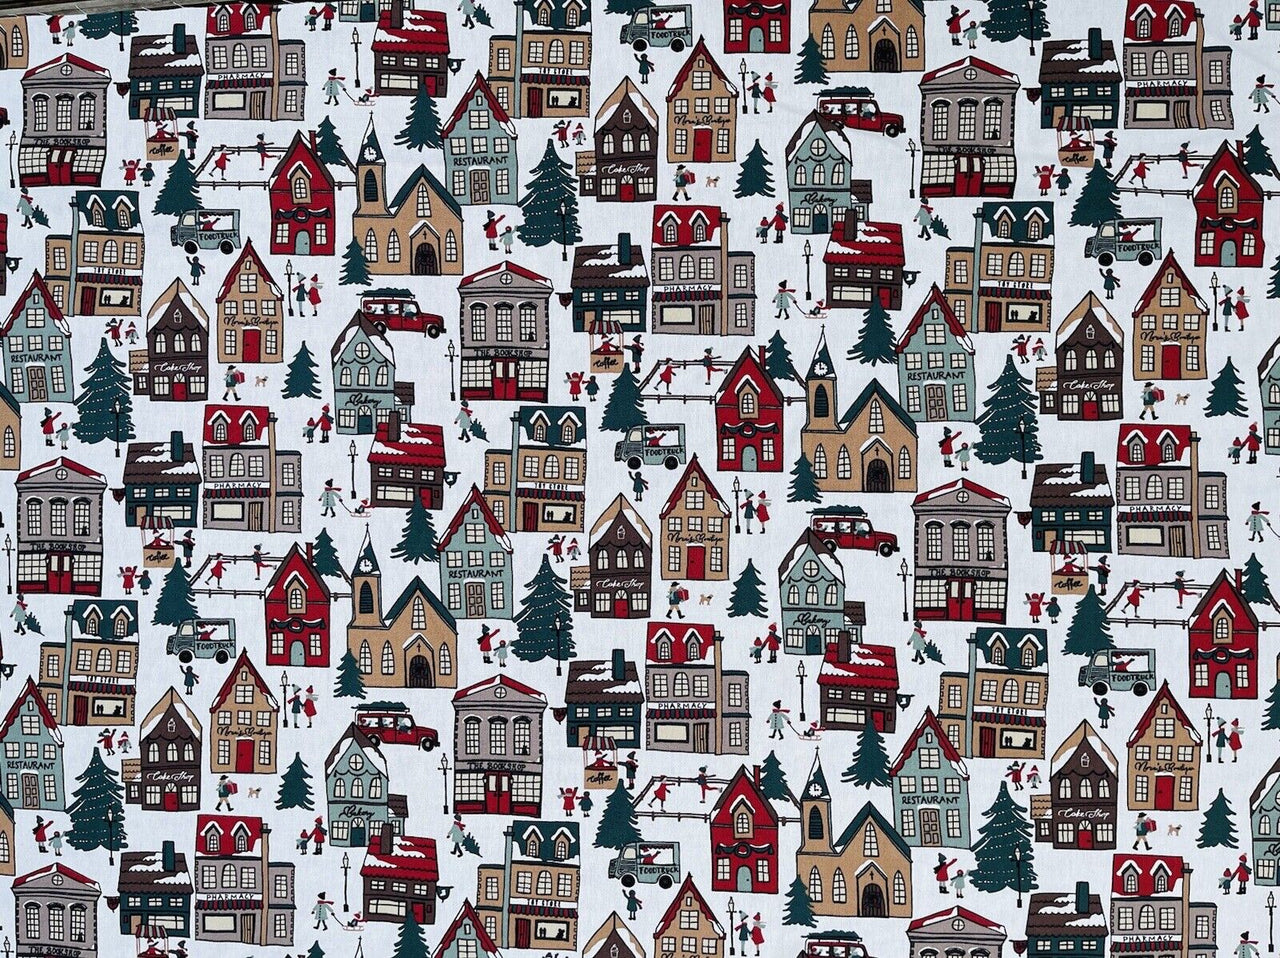 Winter Village Cotton Printed Fabric by Meter Red House Xmas Snow Kids Playing